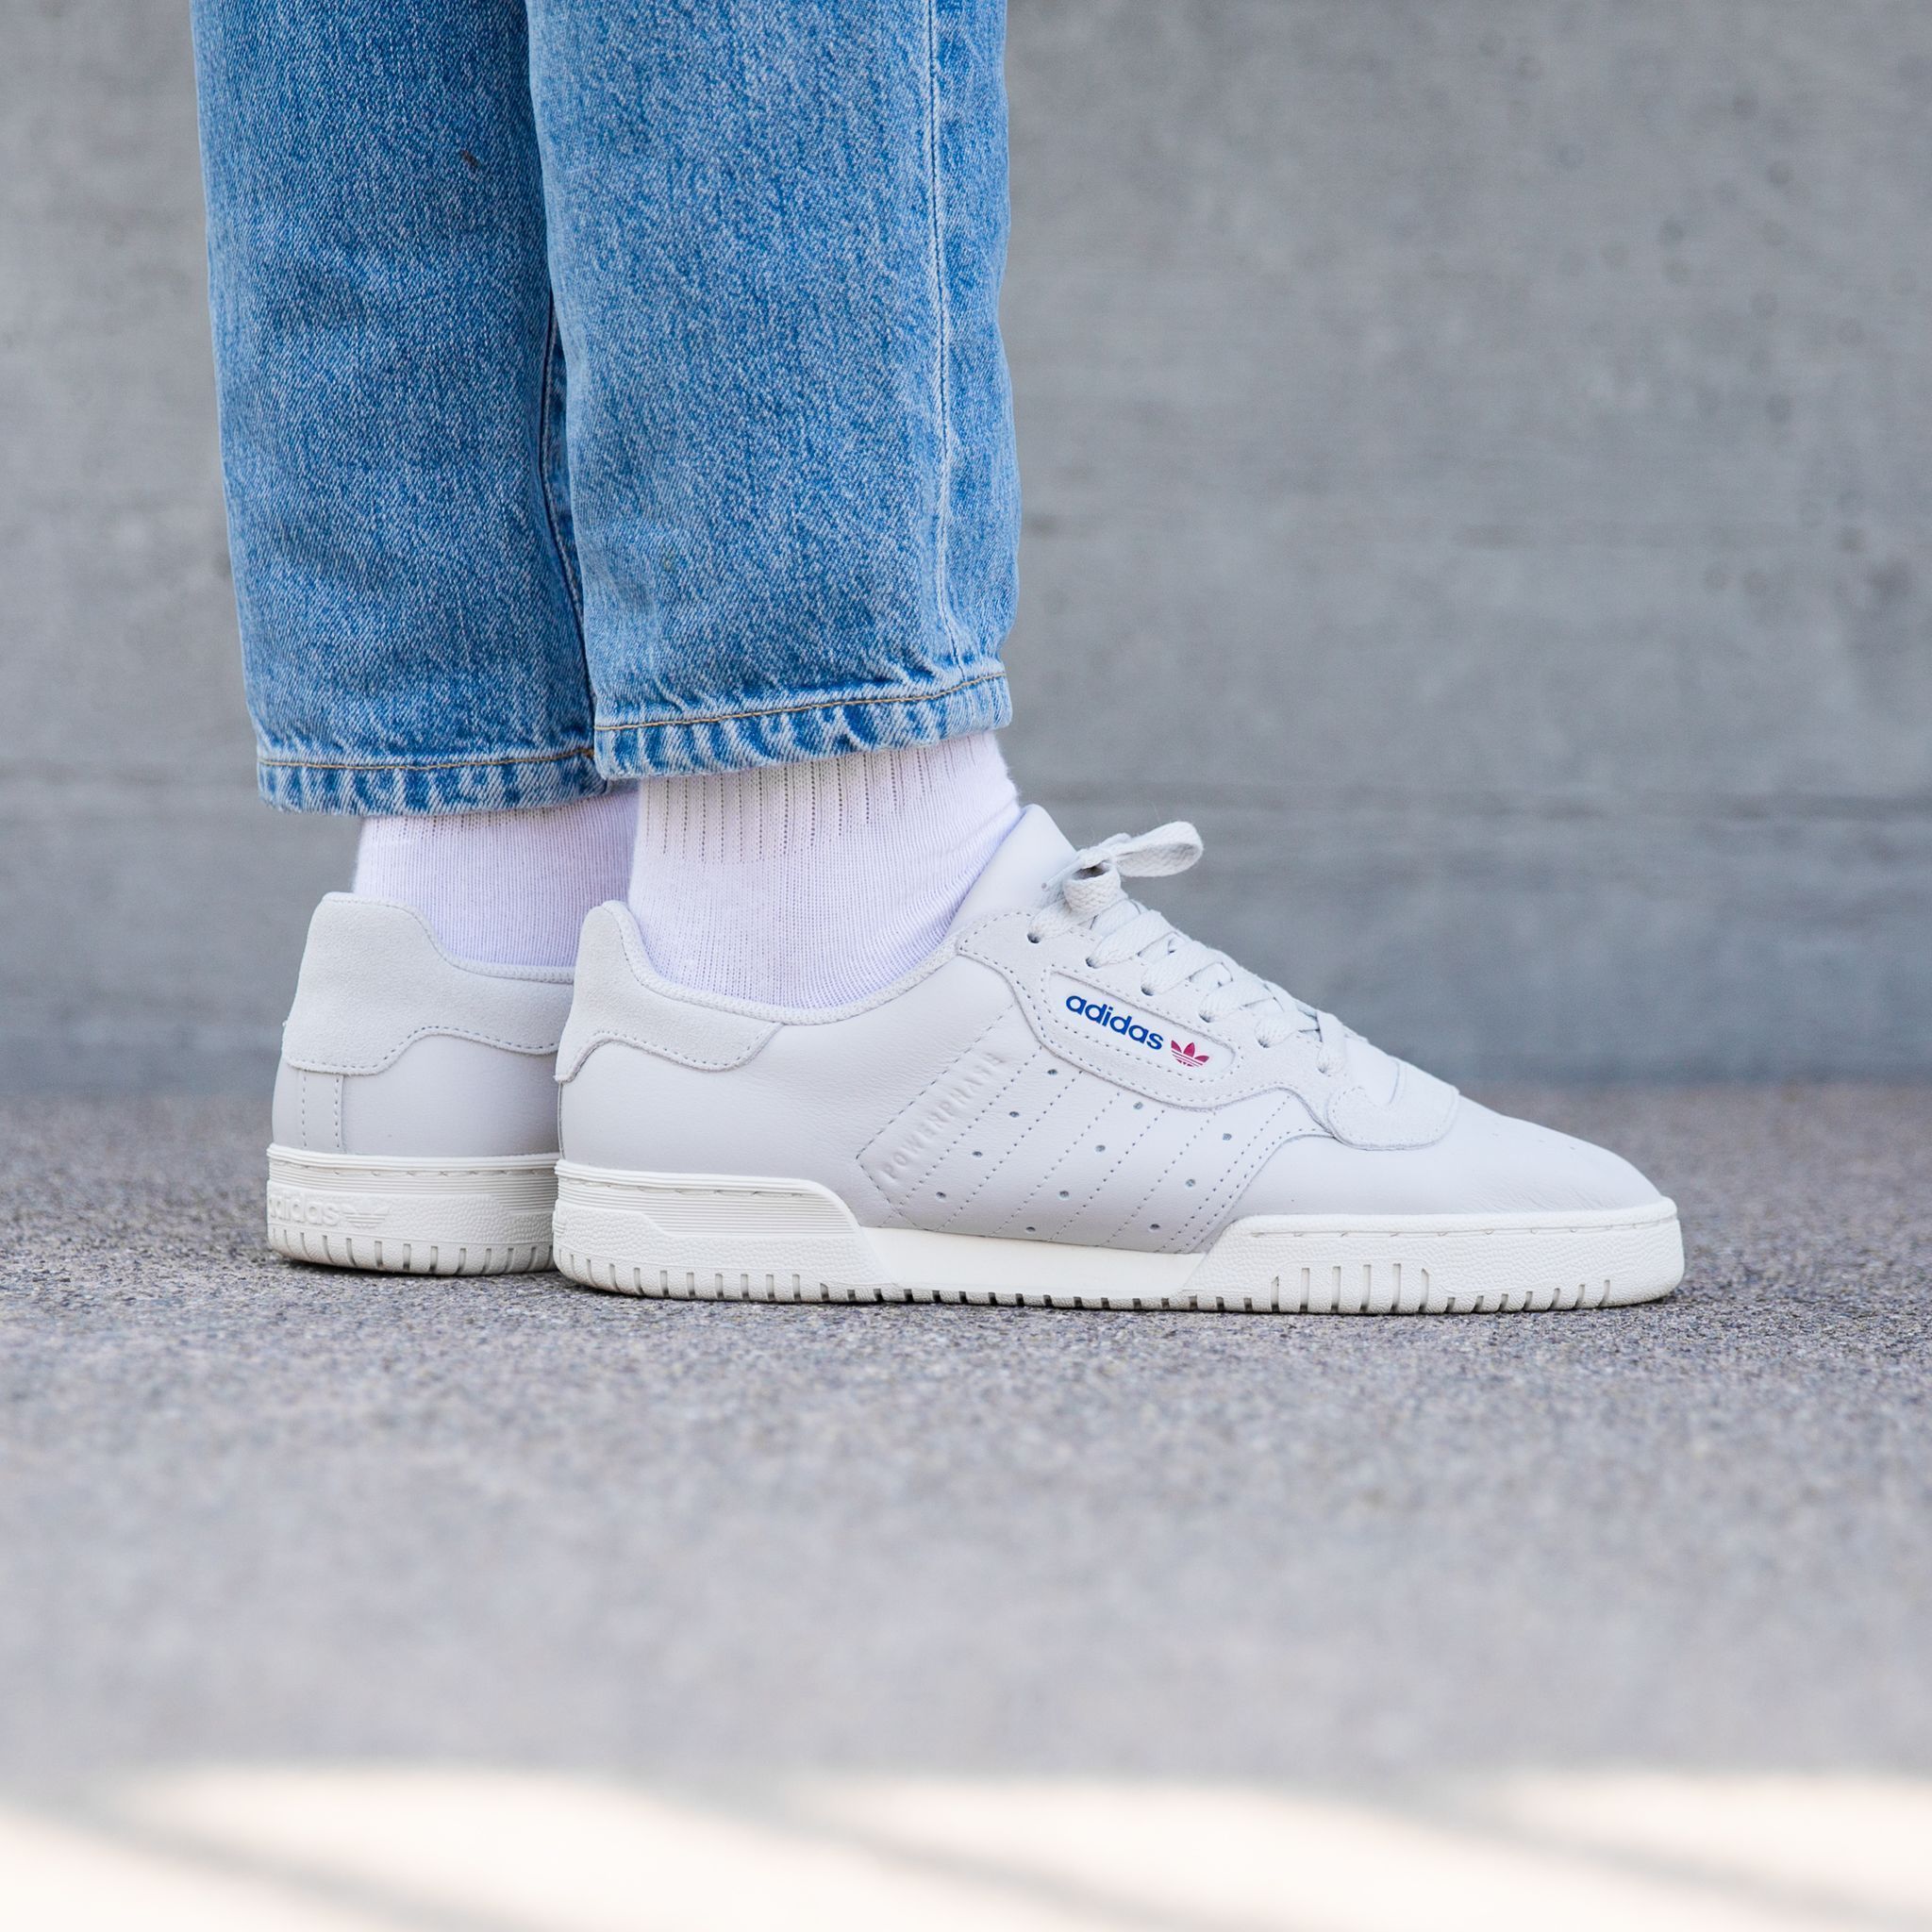 Anotar enlace Surtido Titolo on Twitter: "#NOWAVAILABLE 🔥 Adidas Powerphase - Grey One/Grey  One/Off White link ➡️ https://t.co/WiMQK3gcYh #adidas #powerphase #greyone  #grey #offwhite #white #fresh #kicks #sneakers #new  https://t.co/WzC8cuwj87" / Twitter